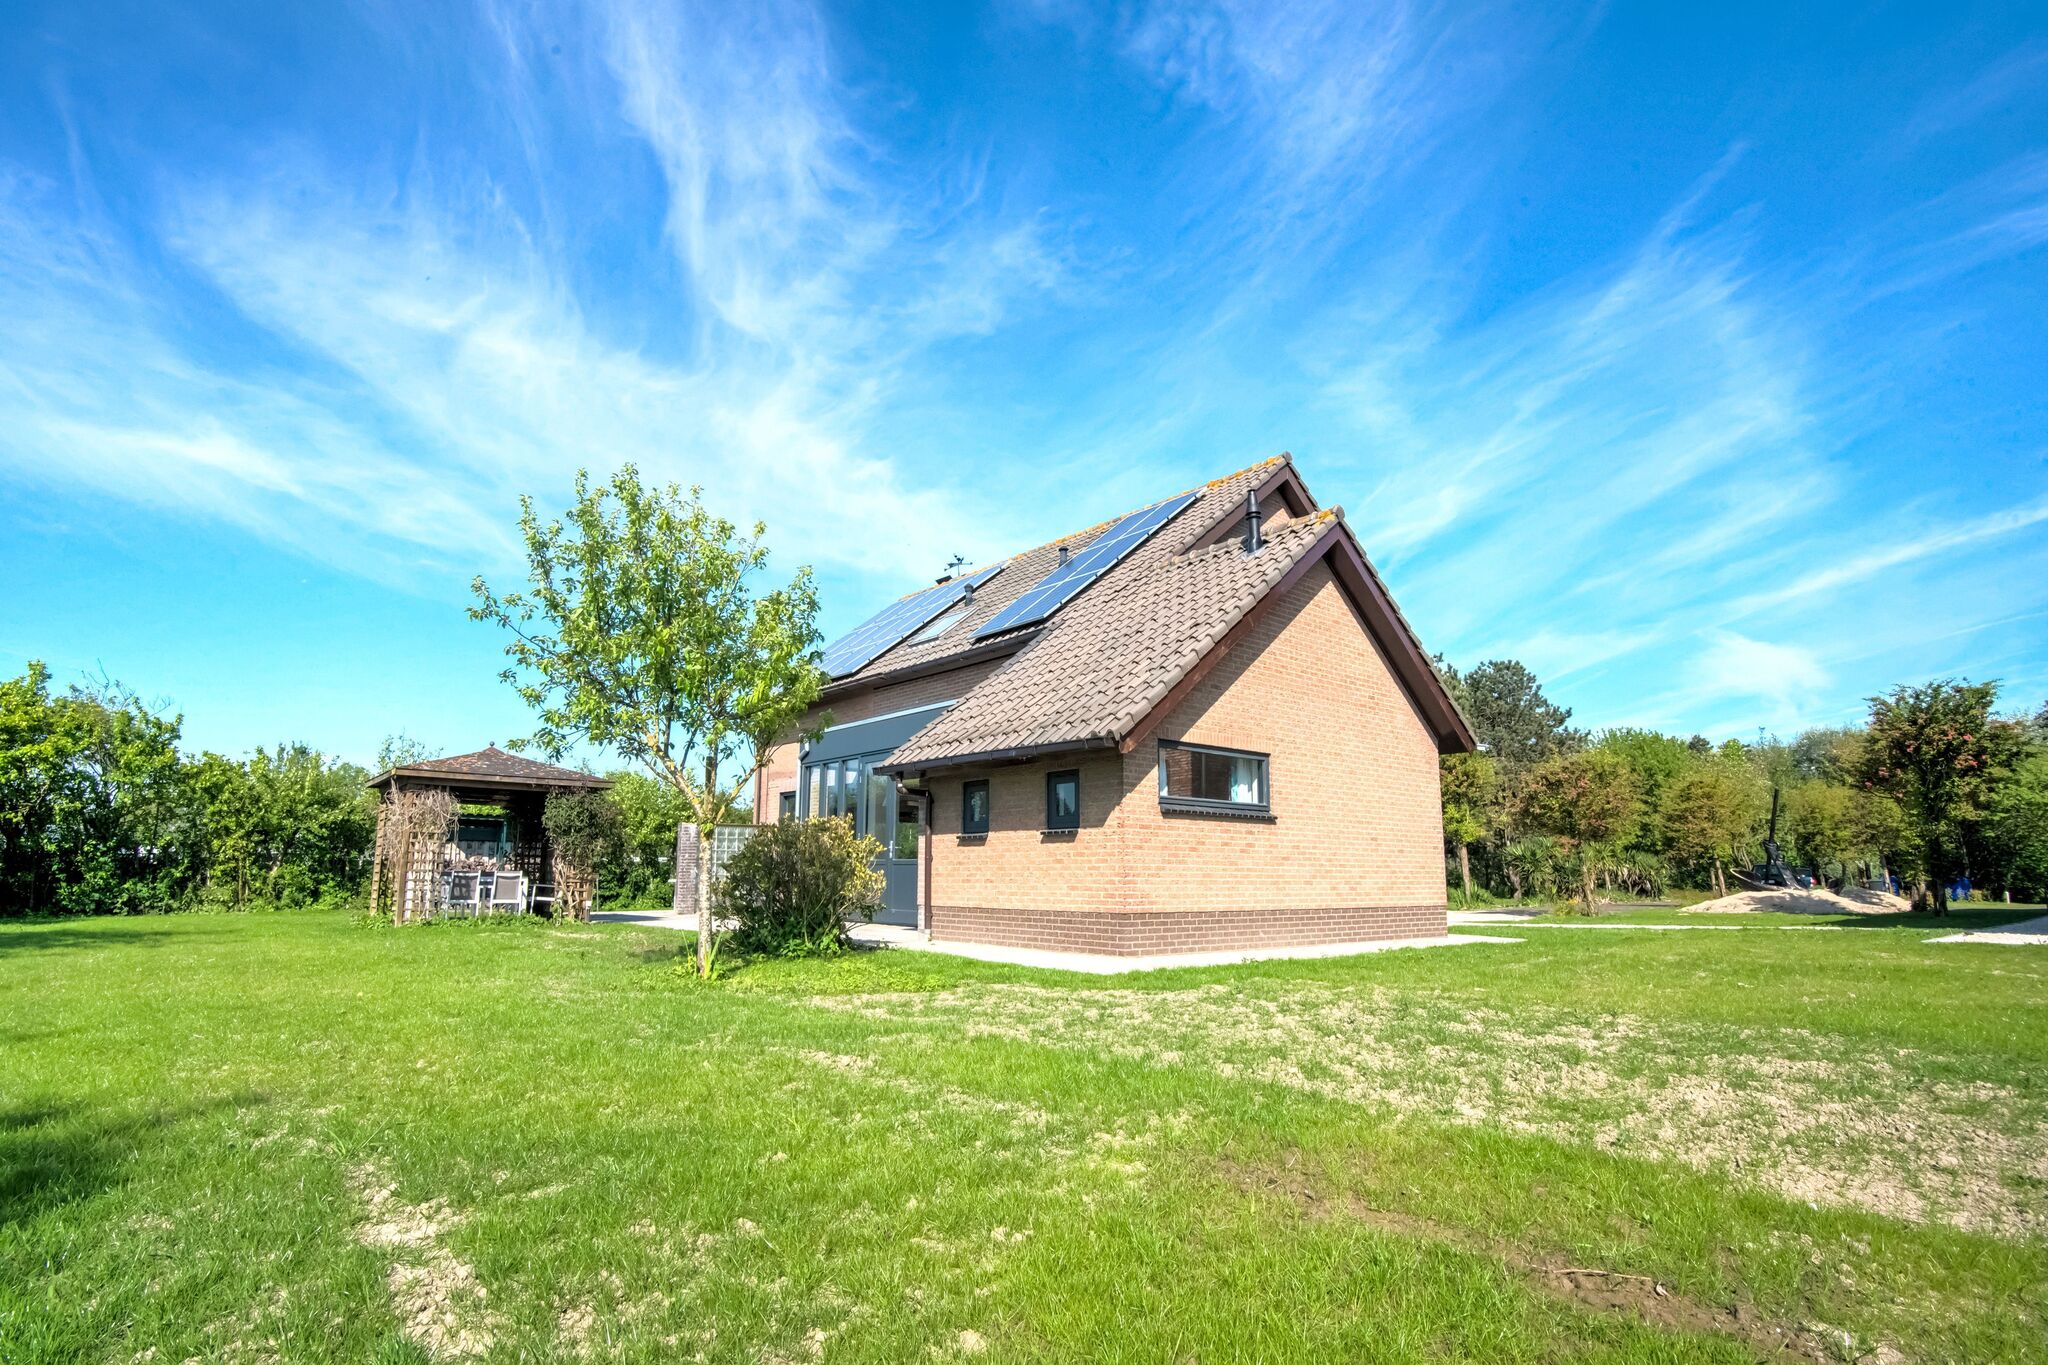 Villa in Cadzand surrounded by nature, near Knokke